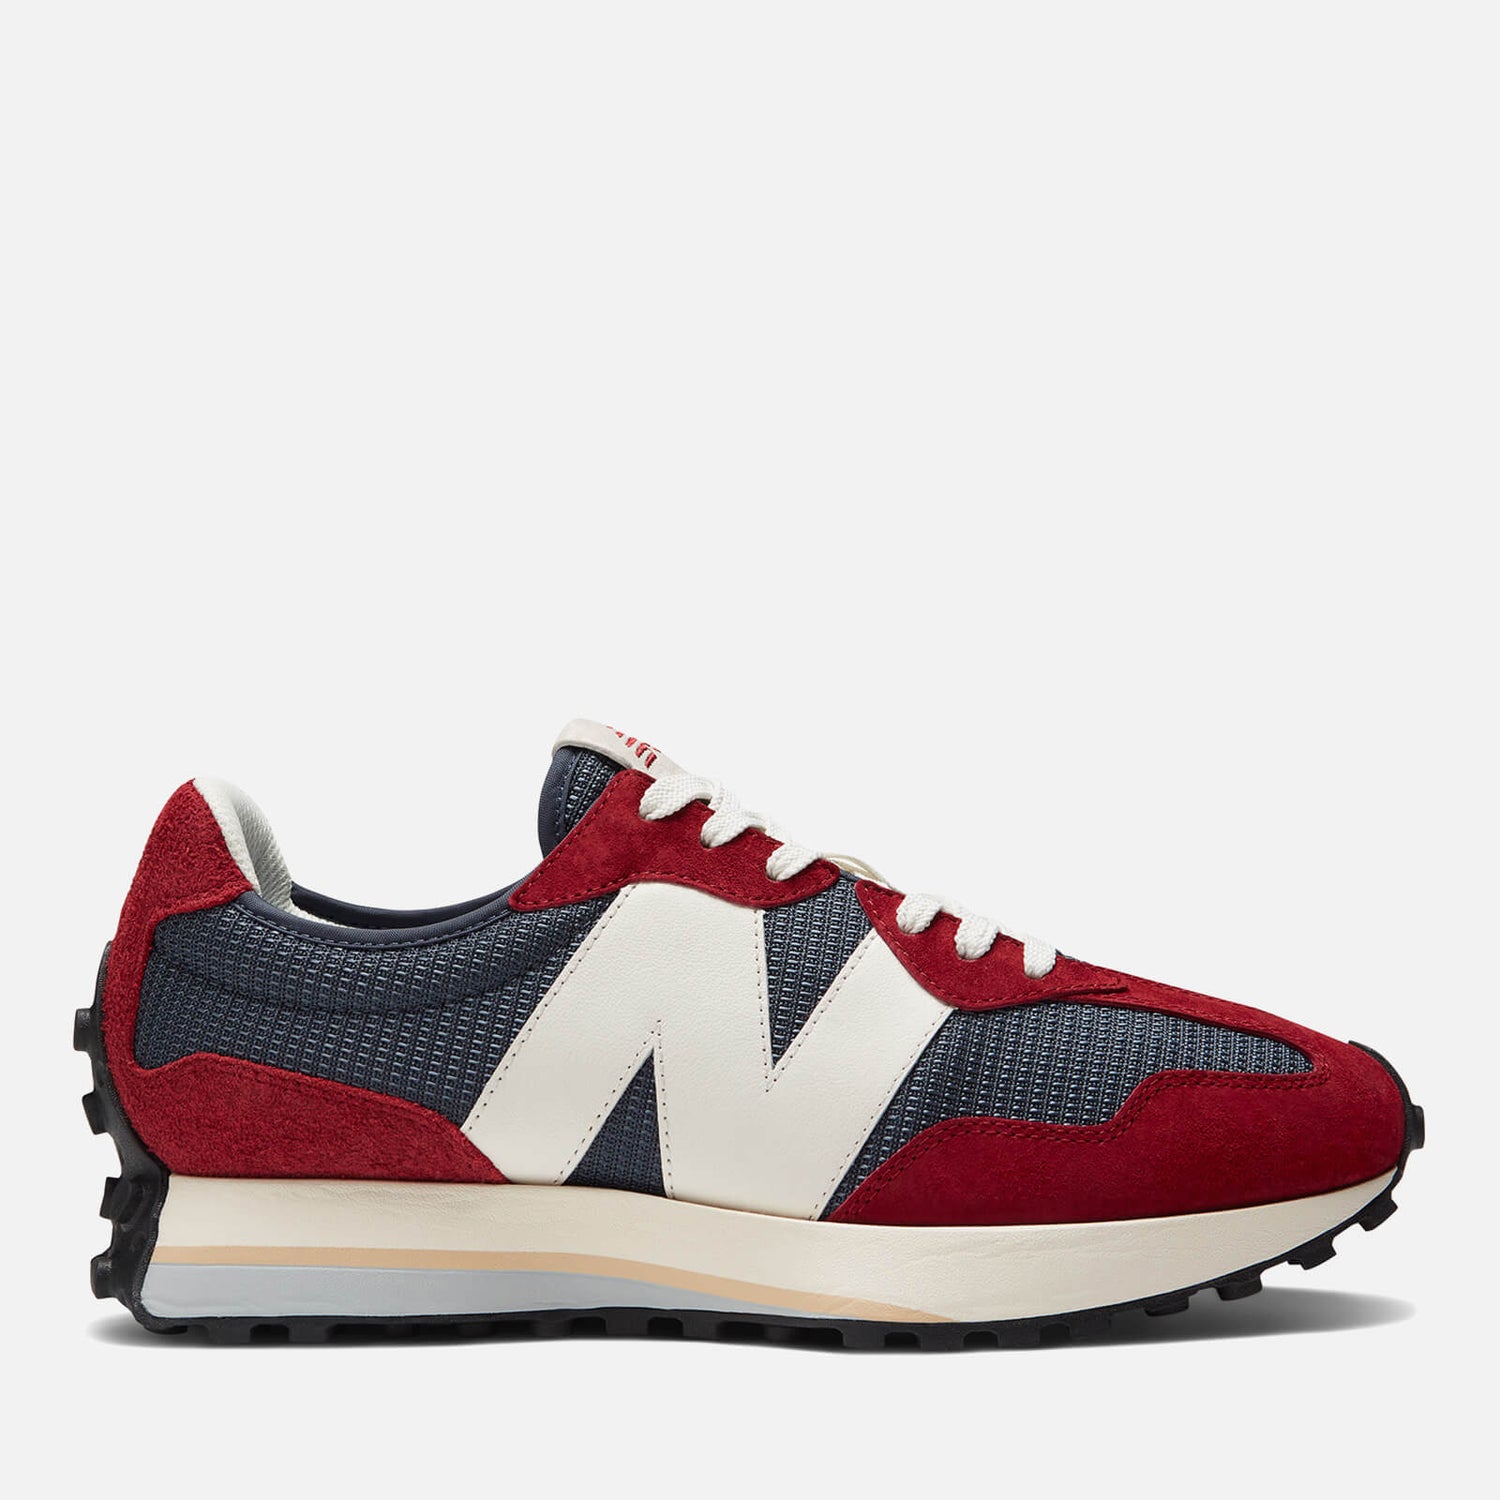 New Balance Men's 327 Archive Pack Trainers - NB Navy - UK 8